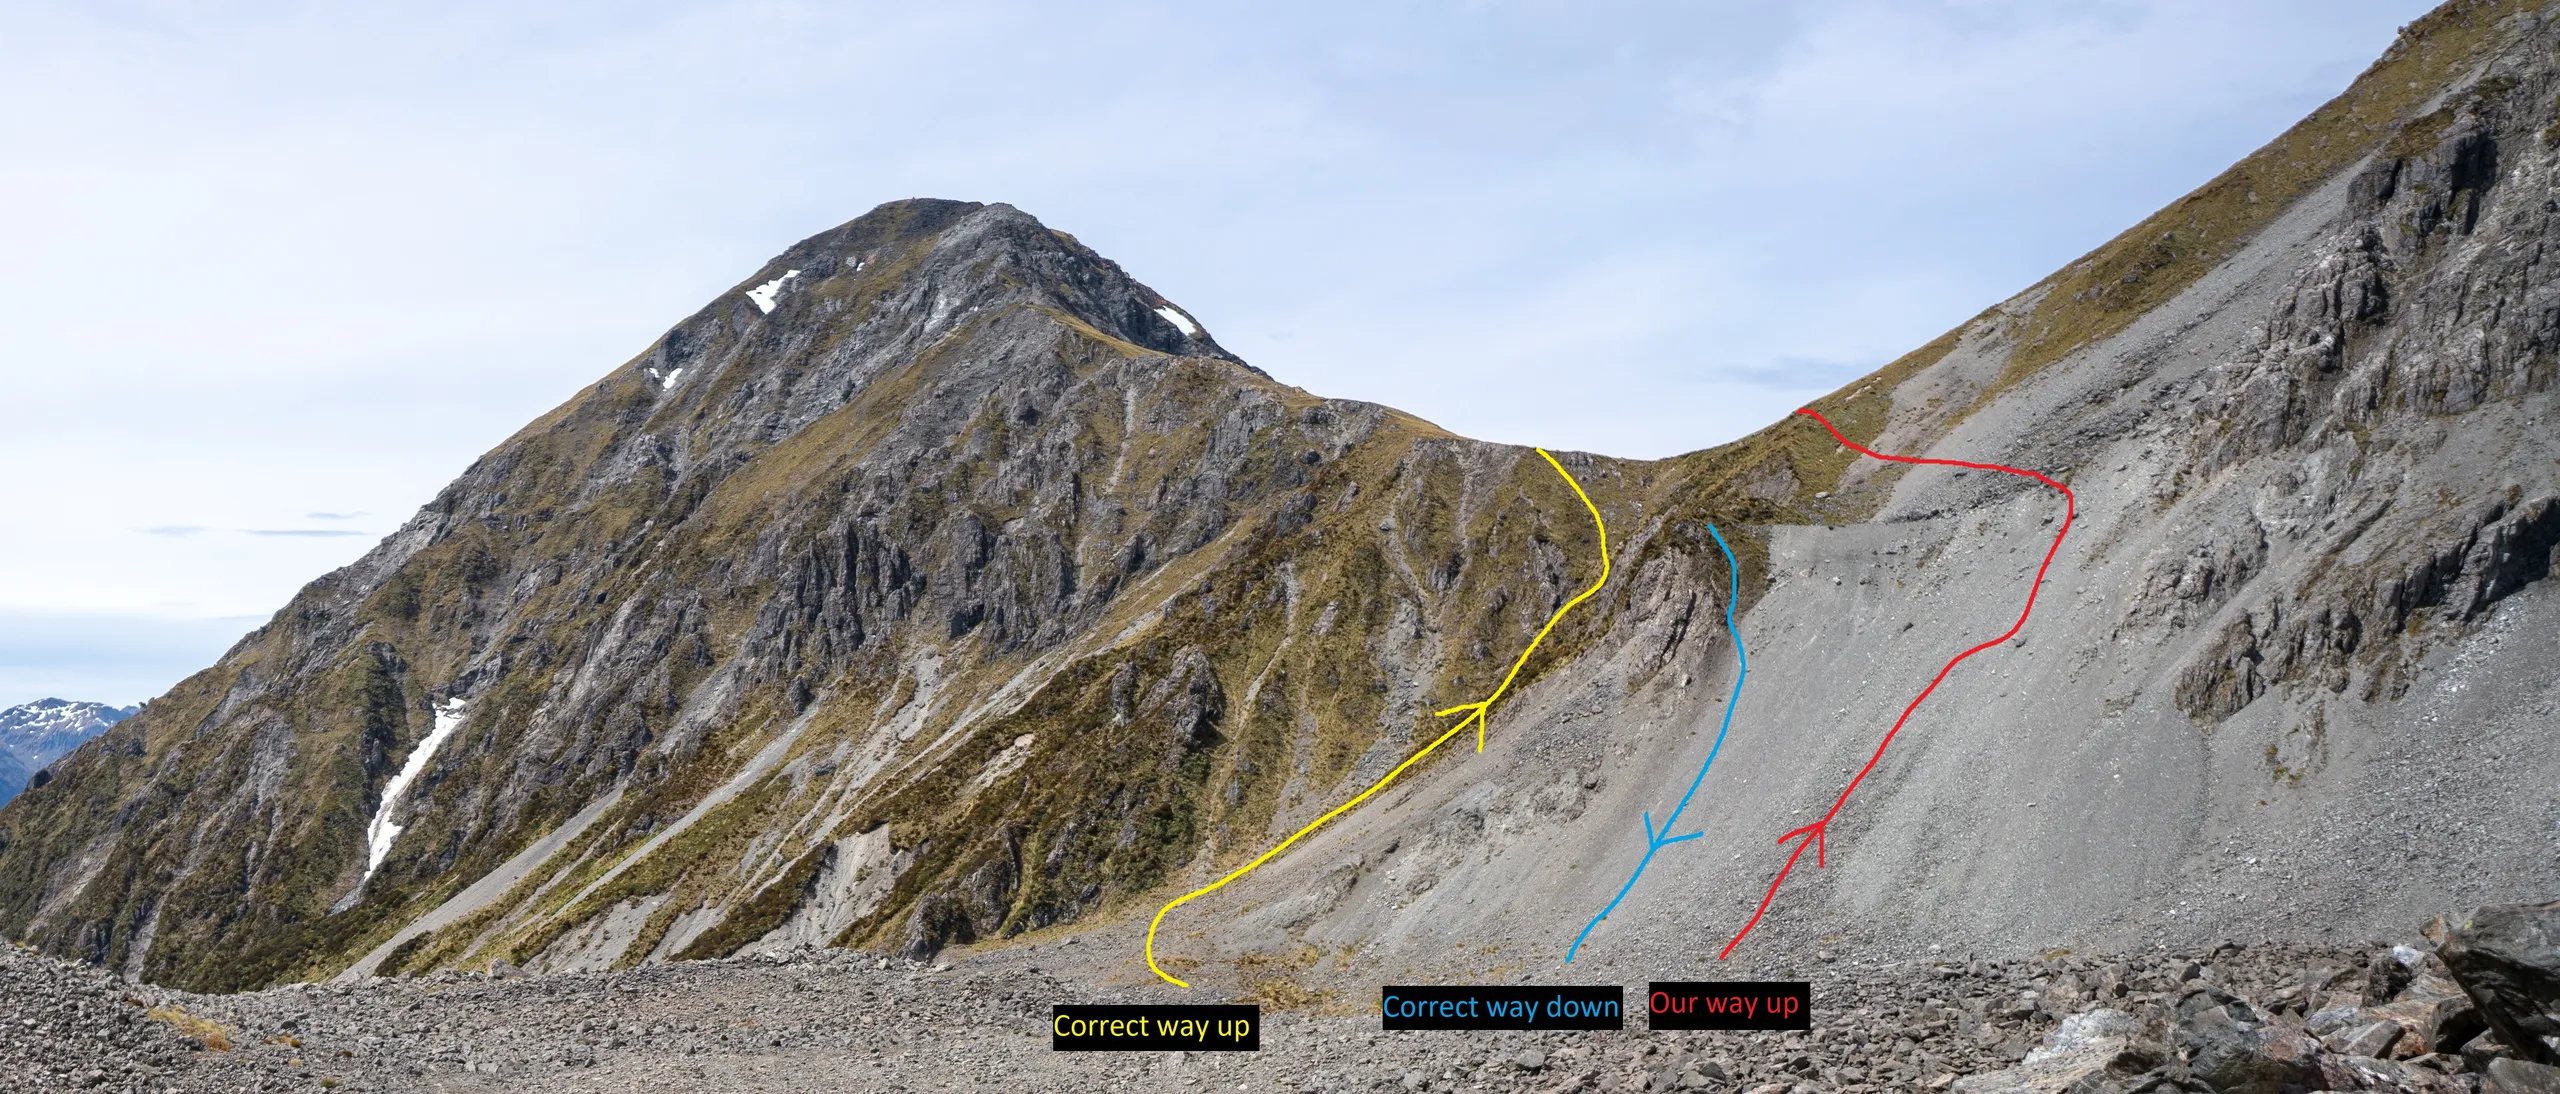 Approximate summary of the proper Tarn Col routes--including our mistaken route. The upwards route is poled.